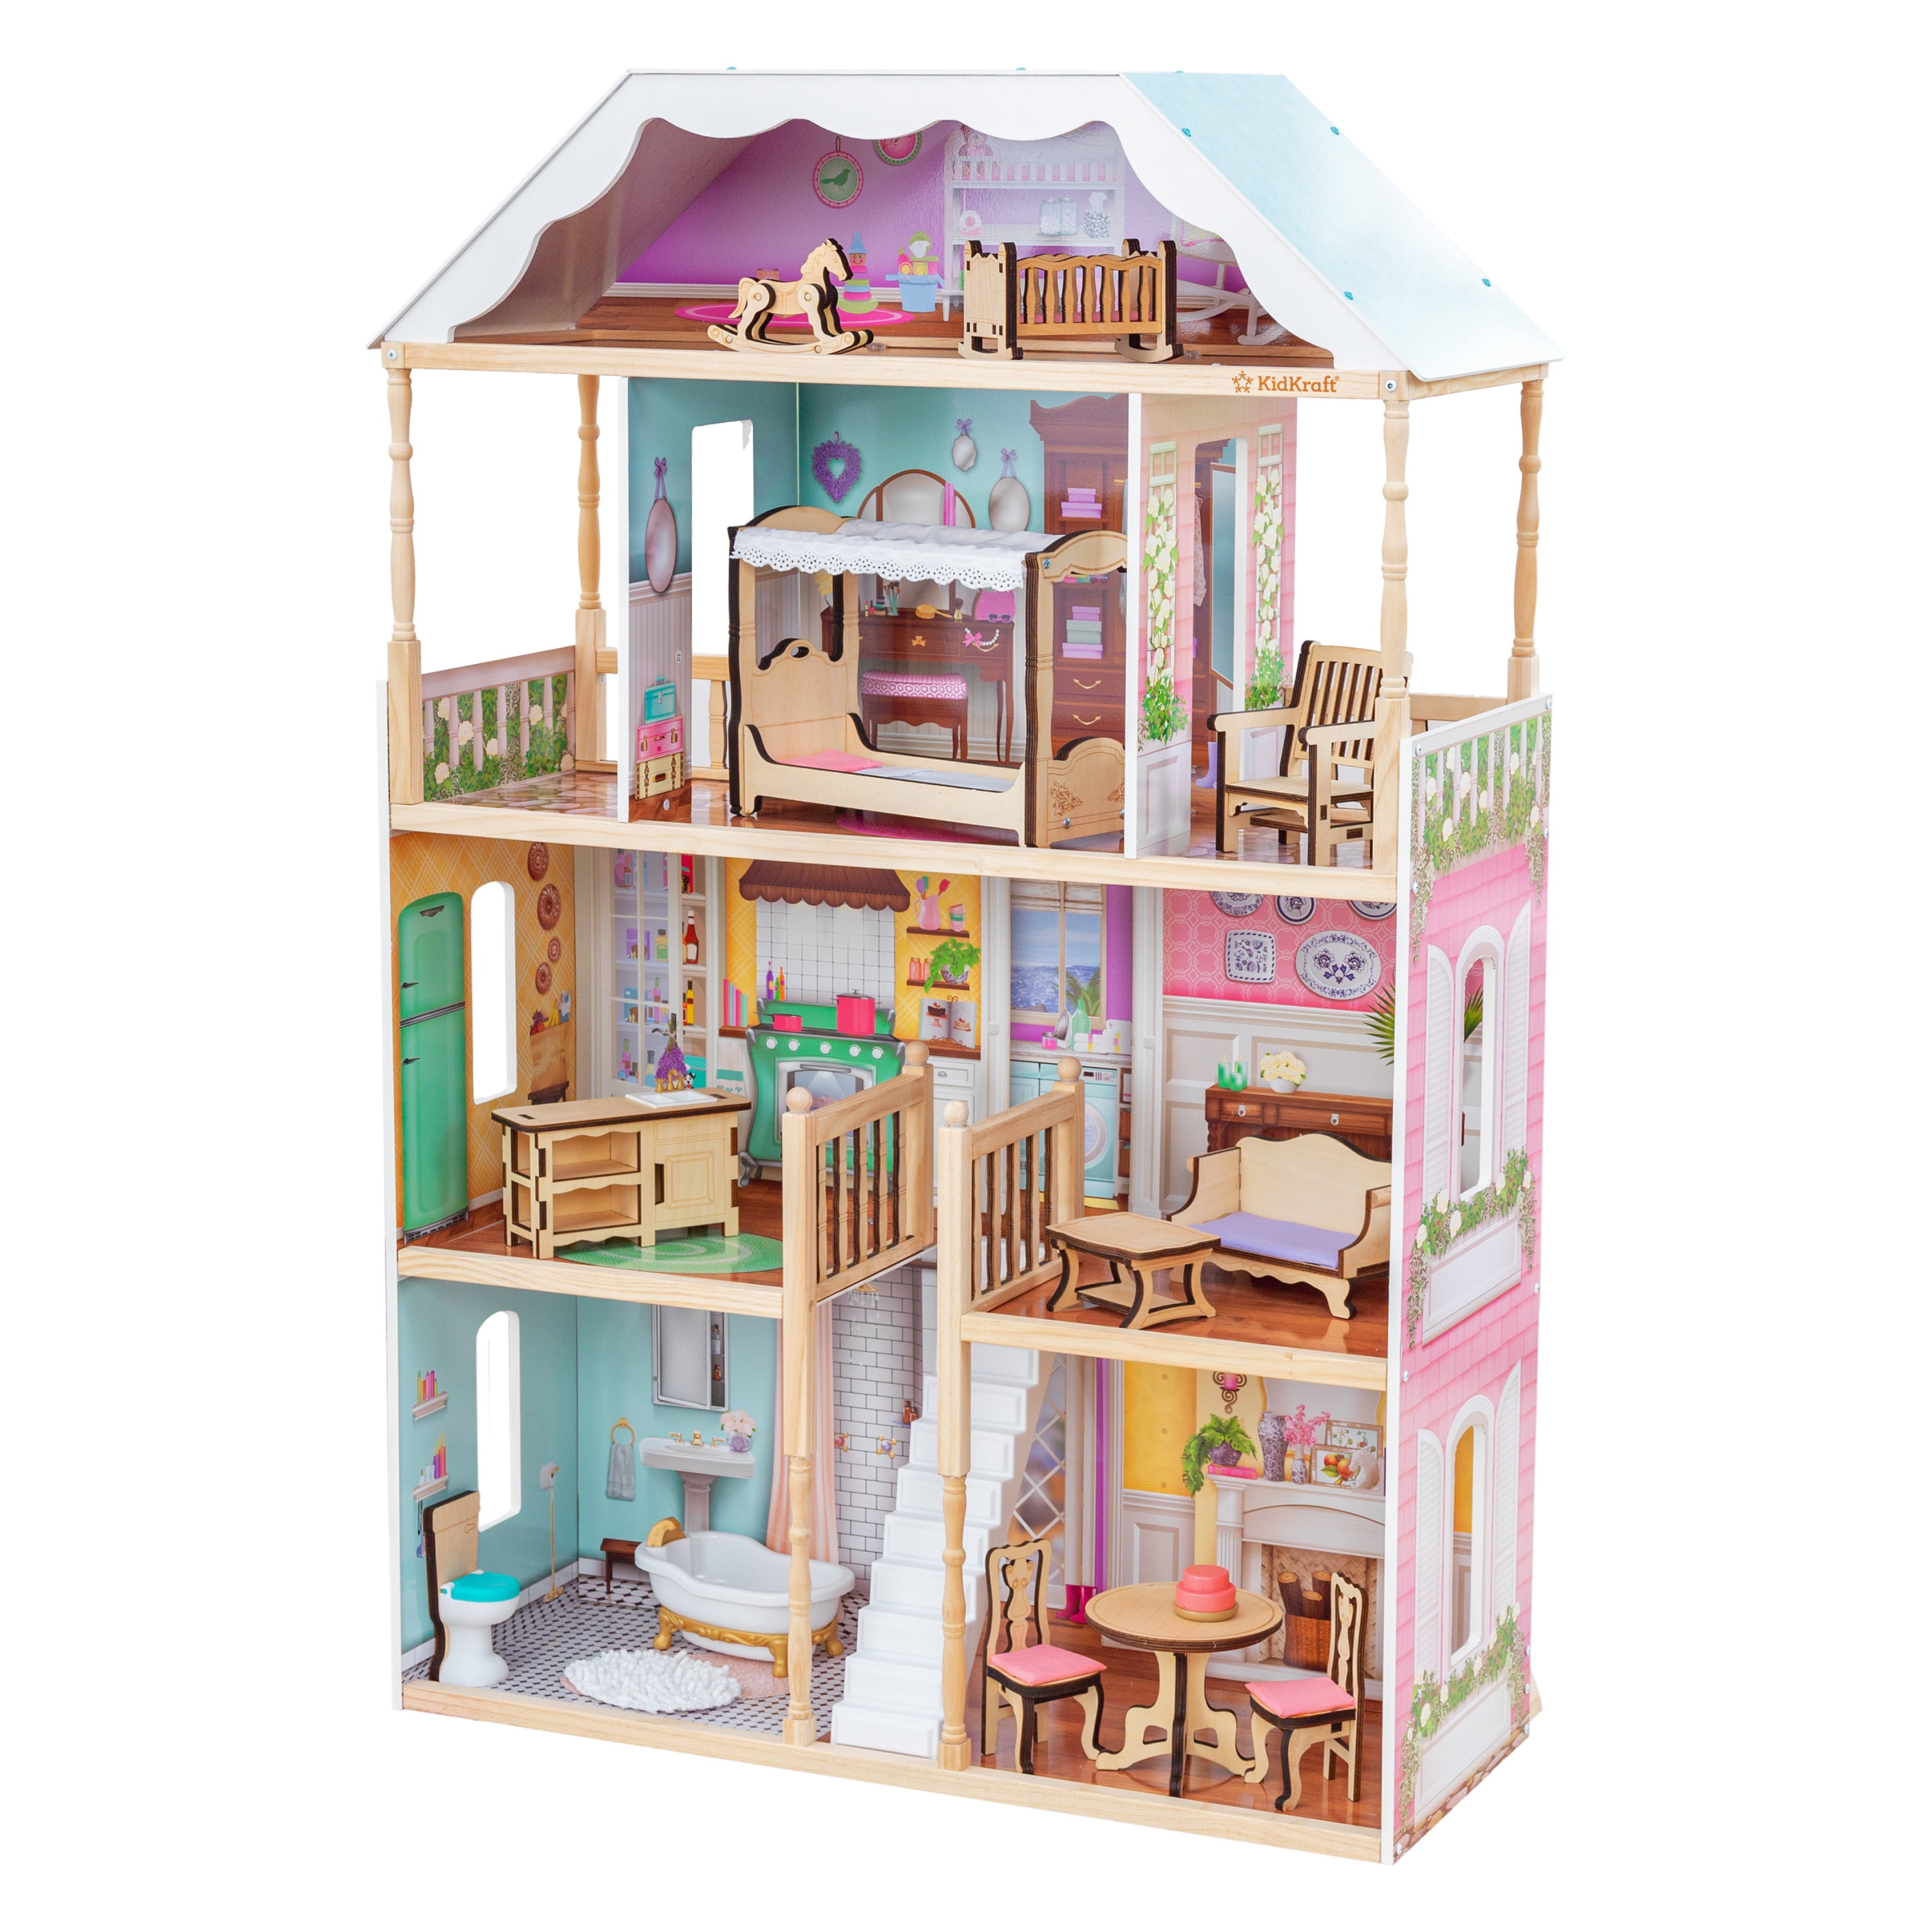 Storybook Mansion Dollhouse with 14-Piece Furniture & Accessory Set by KidKraft 